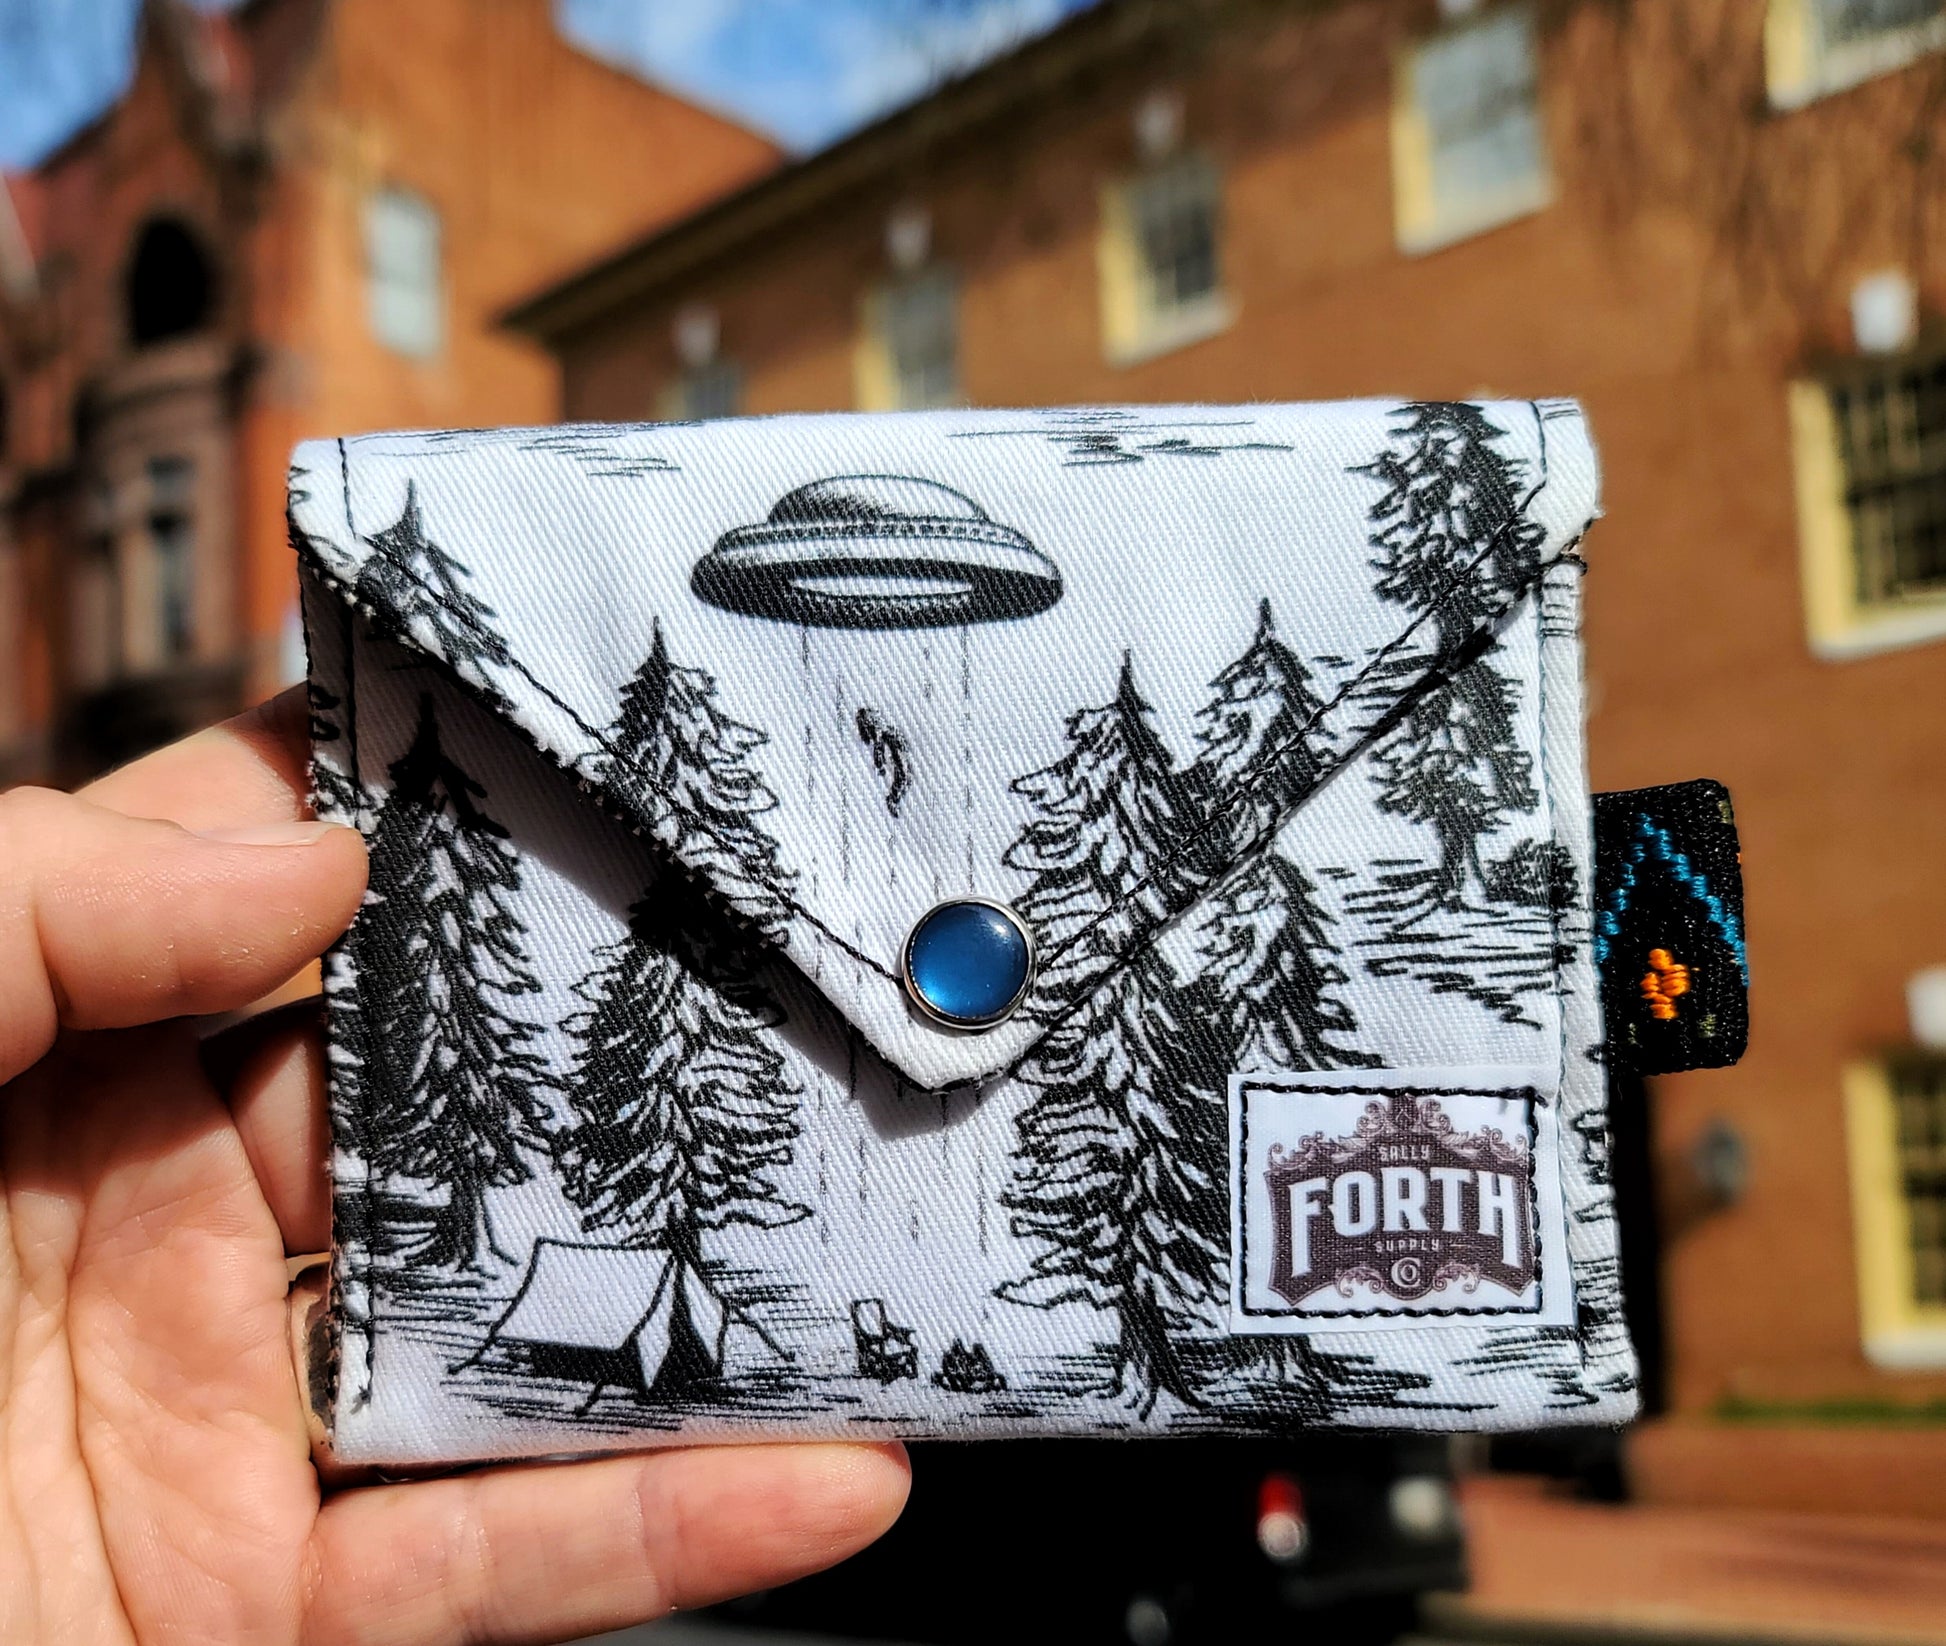 The Original Chap Stick Wallet! The Avail: They're Here - Sally Forth Supply Co.